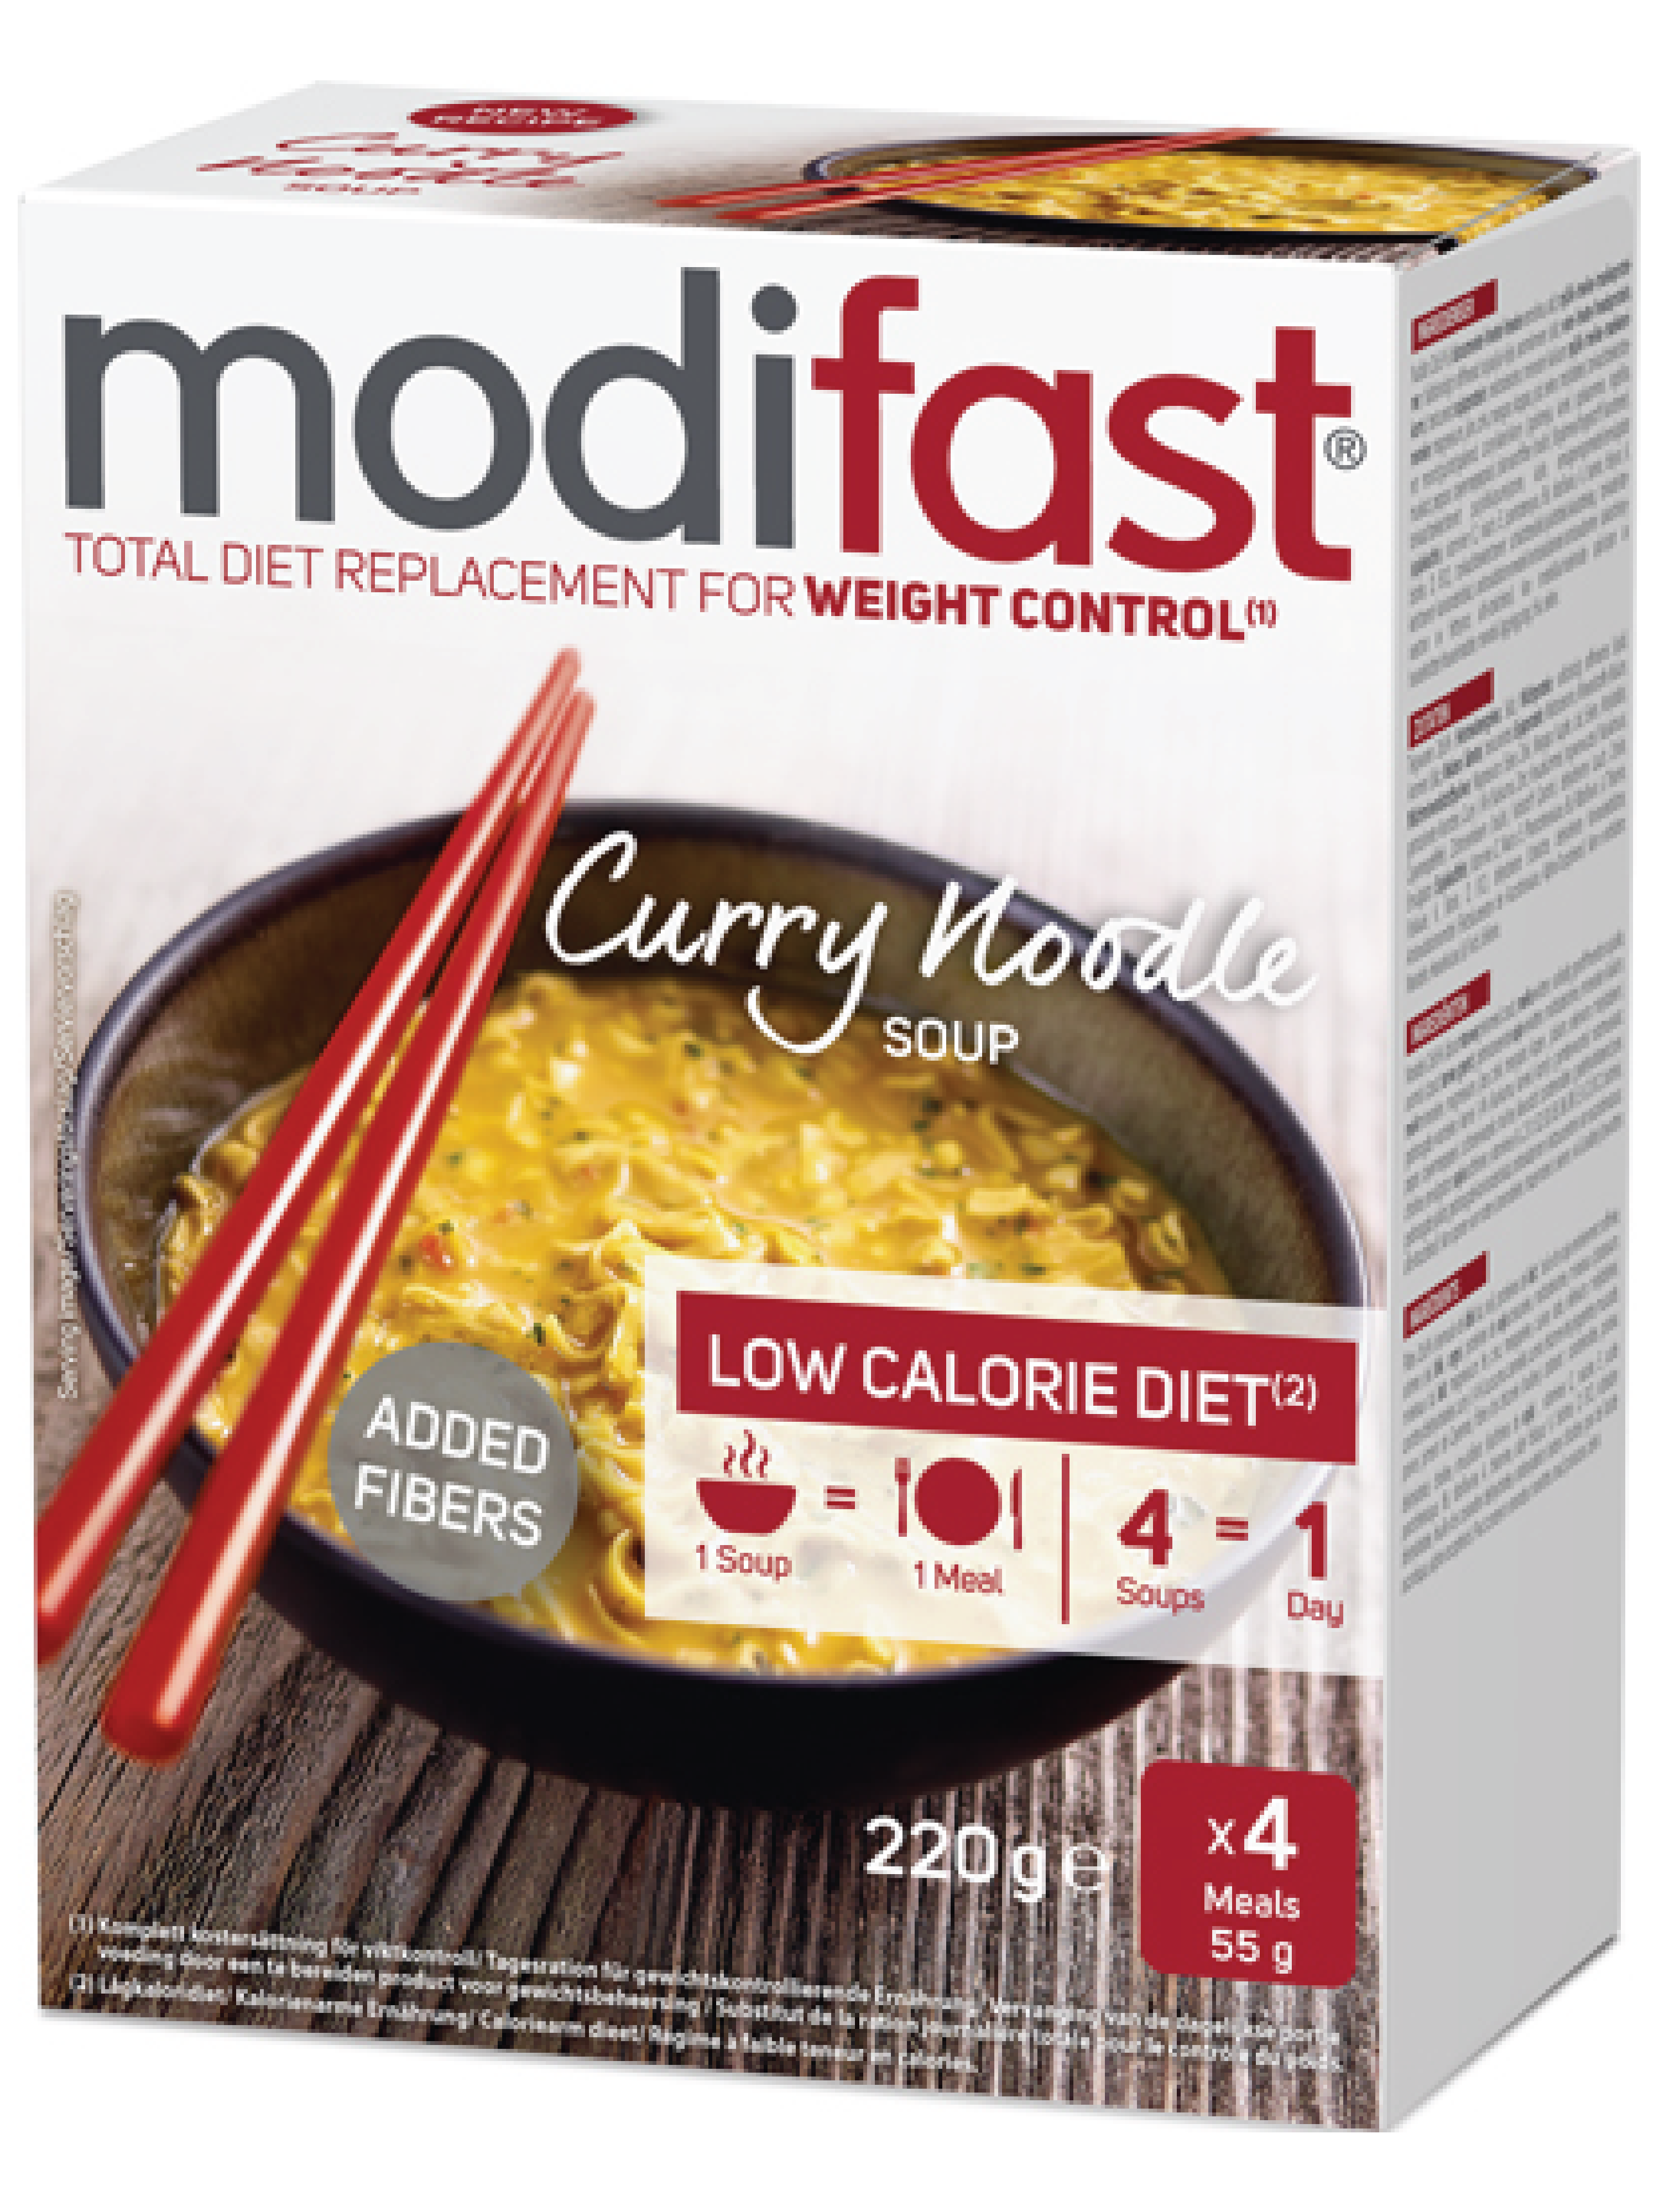 Modifast LCD Nudelsuppe m/curry, 4 x 55 g